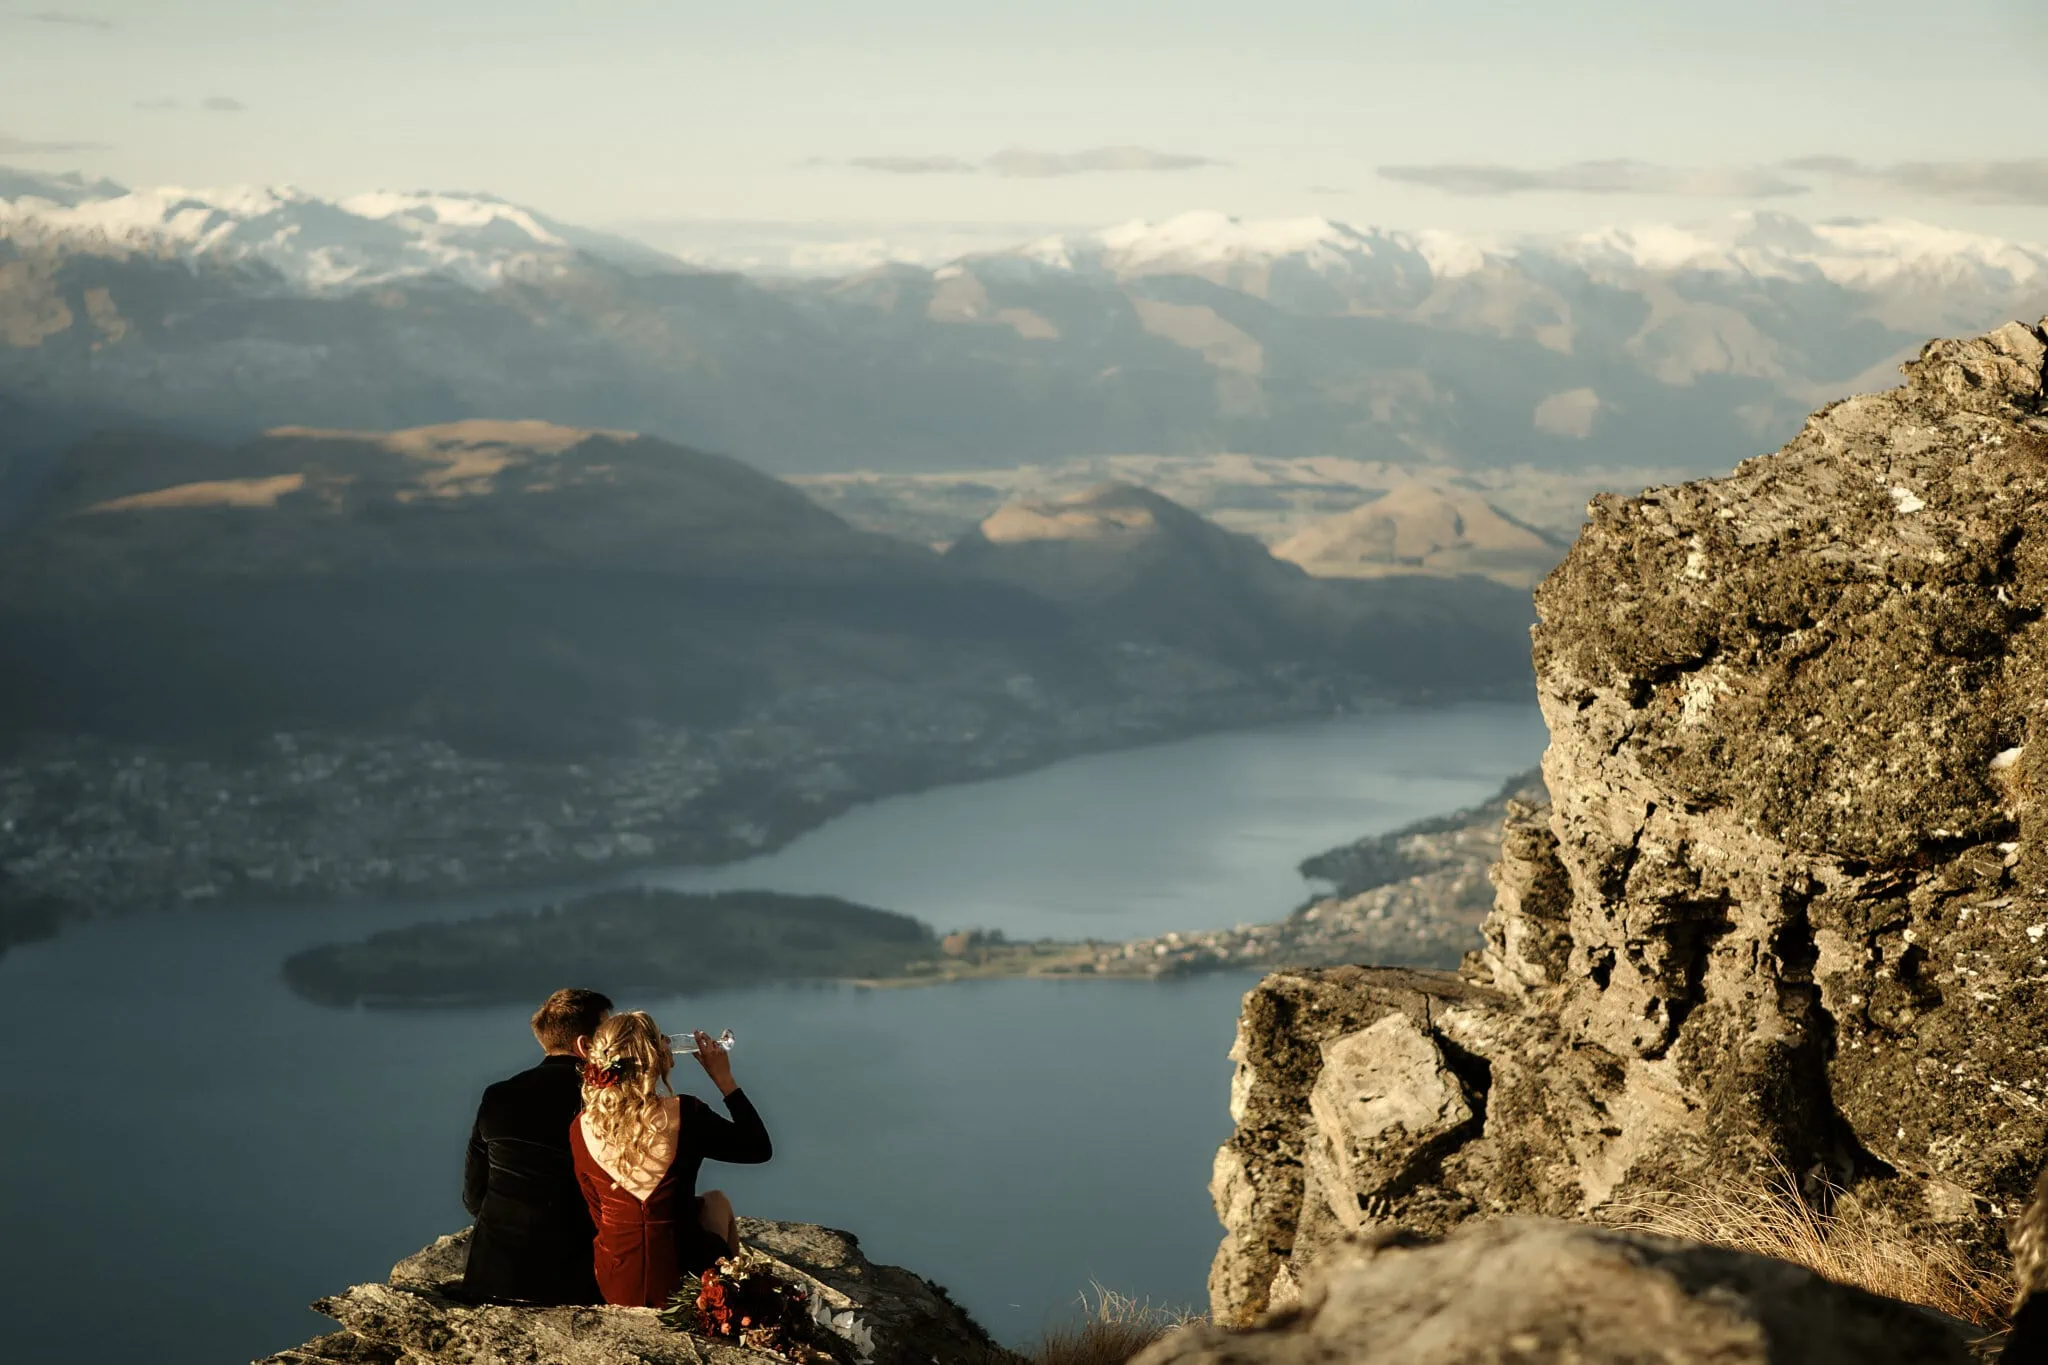 One-sentence description: Claire and Rob celebrate their heli elopement wedding at Cecil Peak, sitting on top of a mountain overlooking Lake Wanaka.